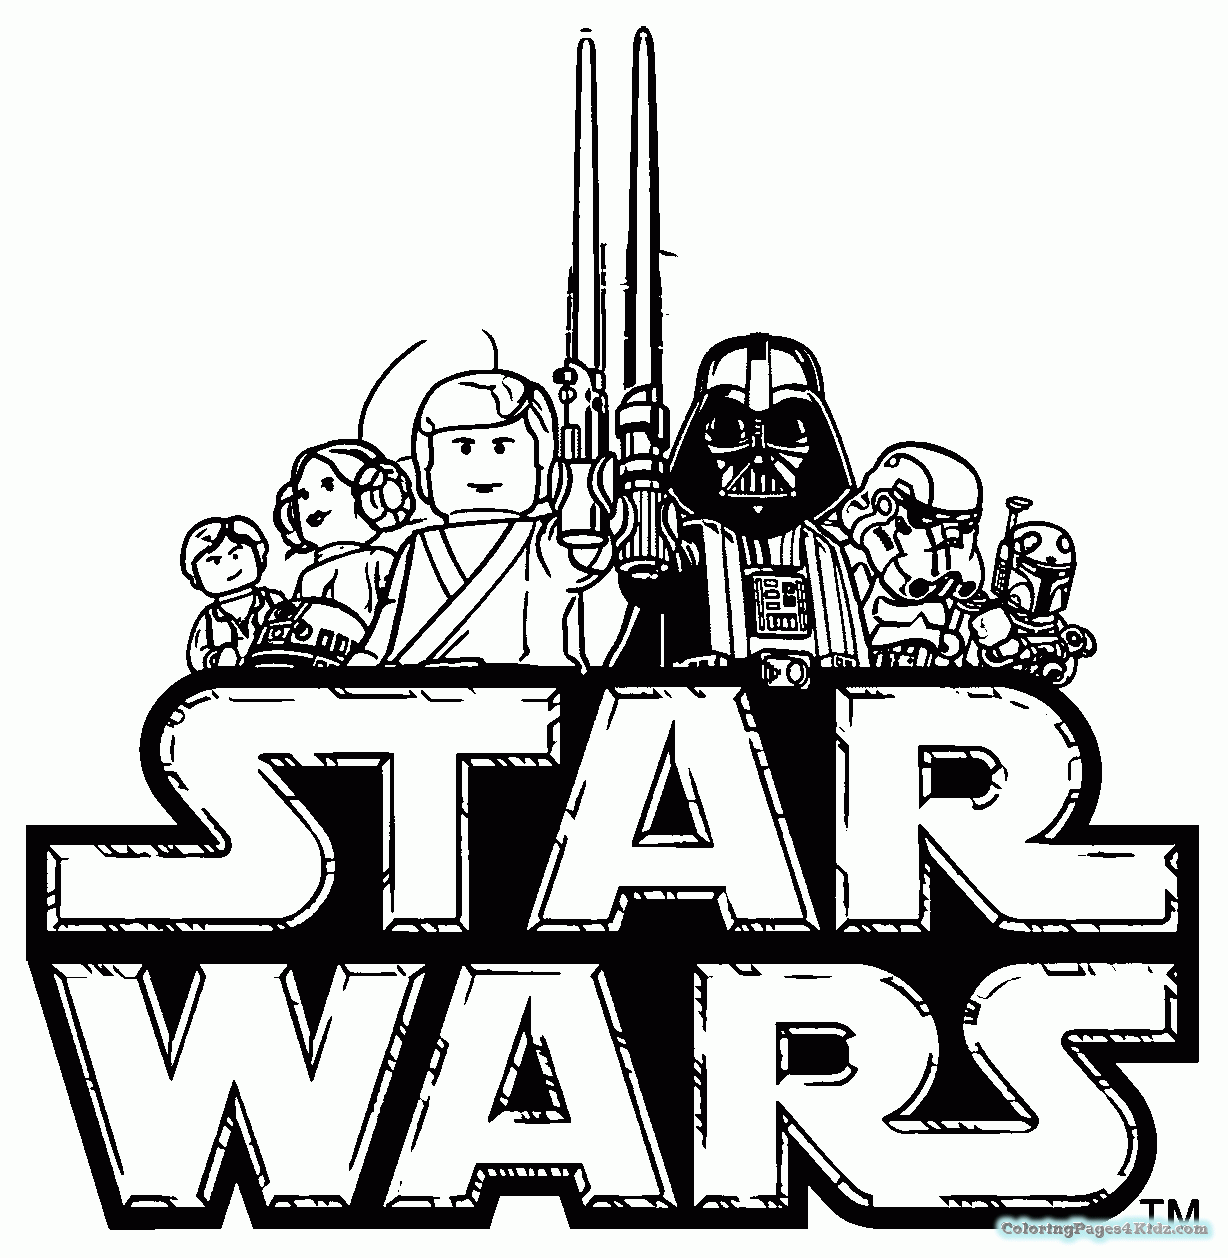 Printable coloring pages lego coloring pages lego star wars lego coloring